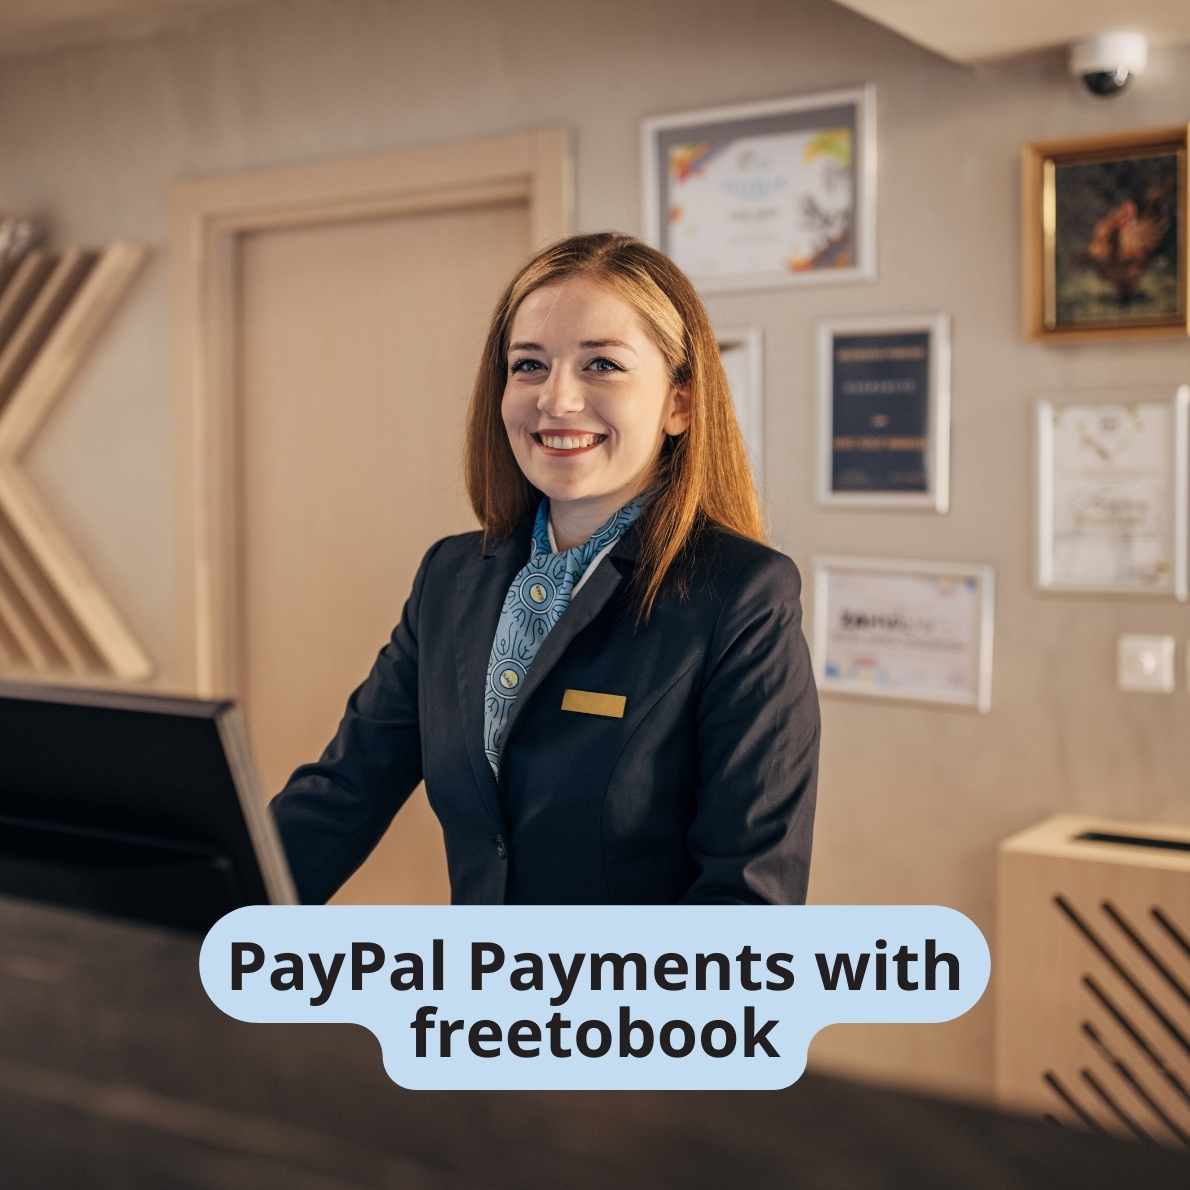 Paypal Payments with freetobook